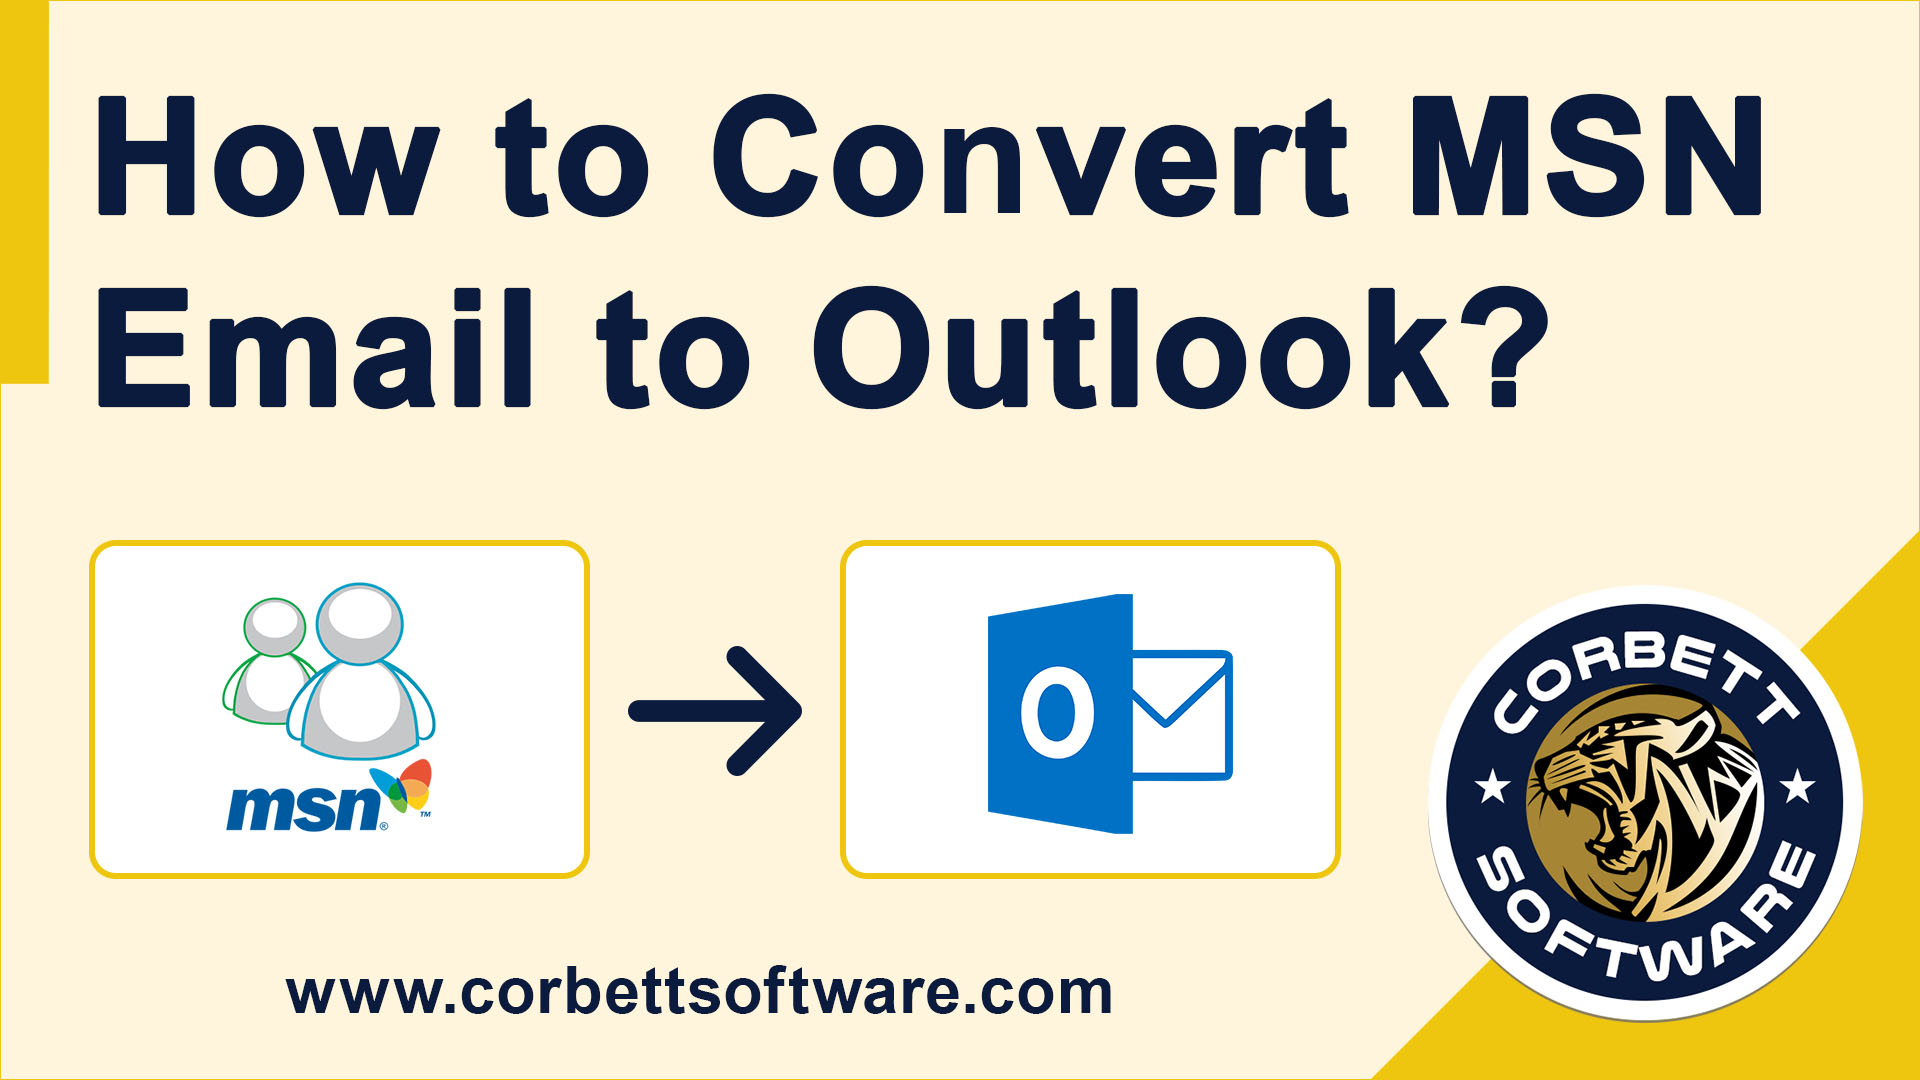 Convert MSN Email to Outlook